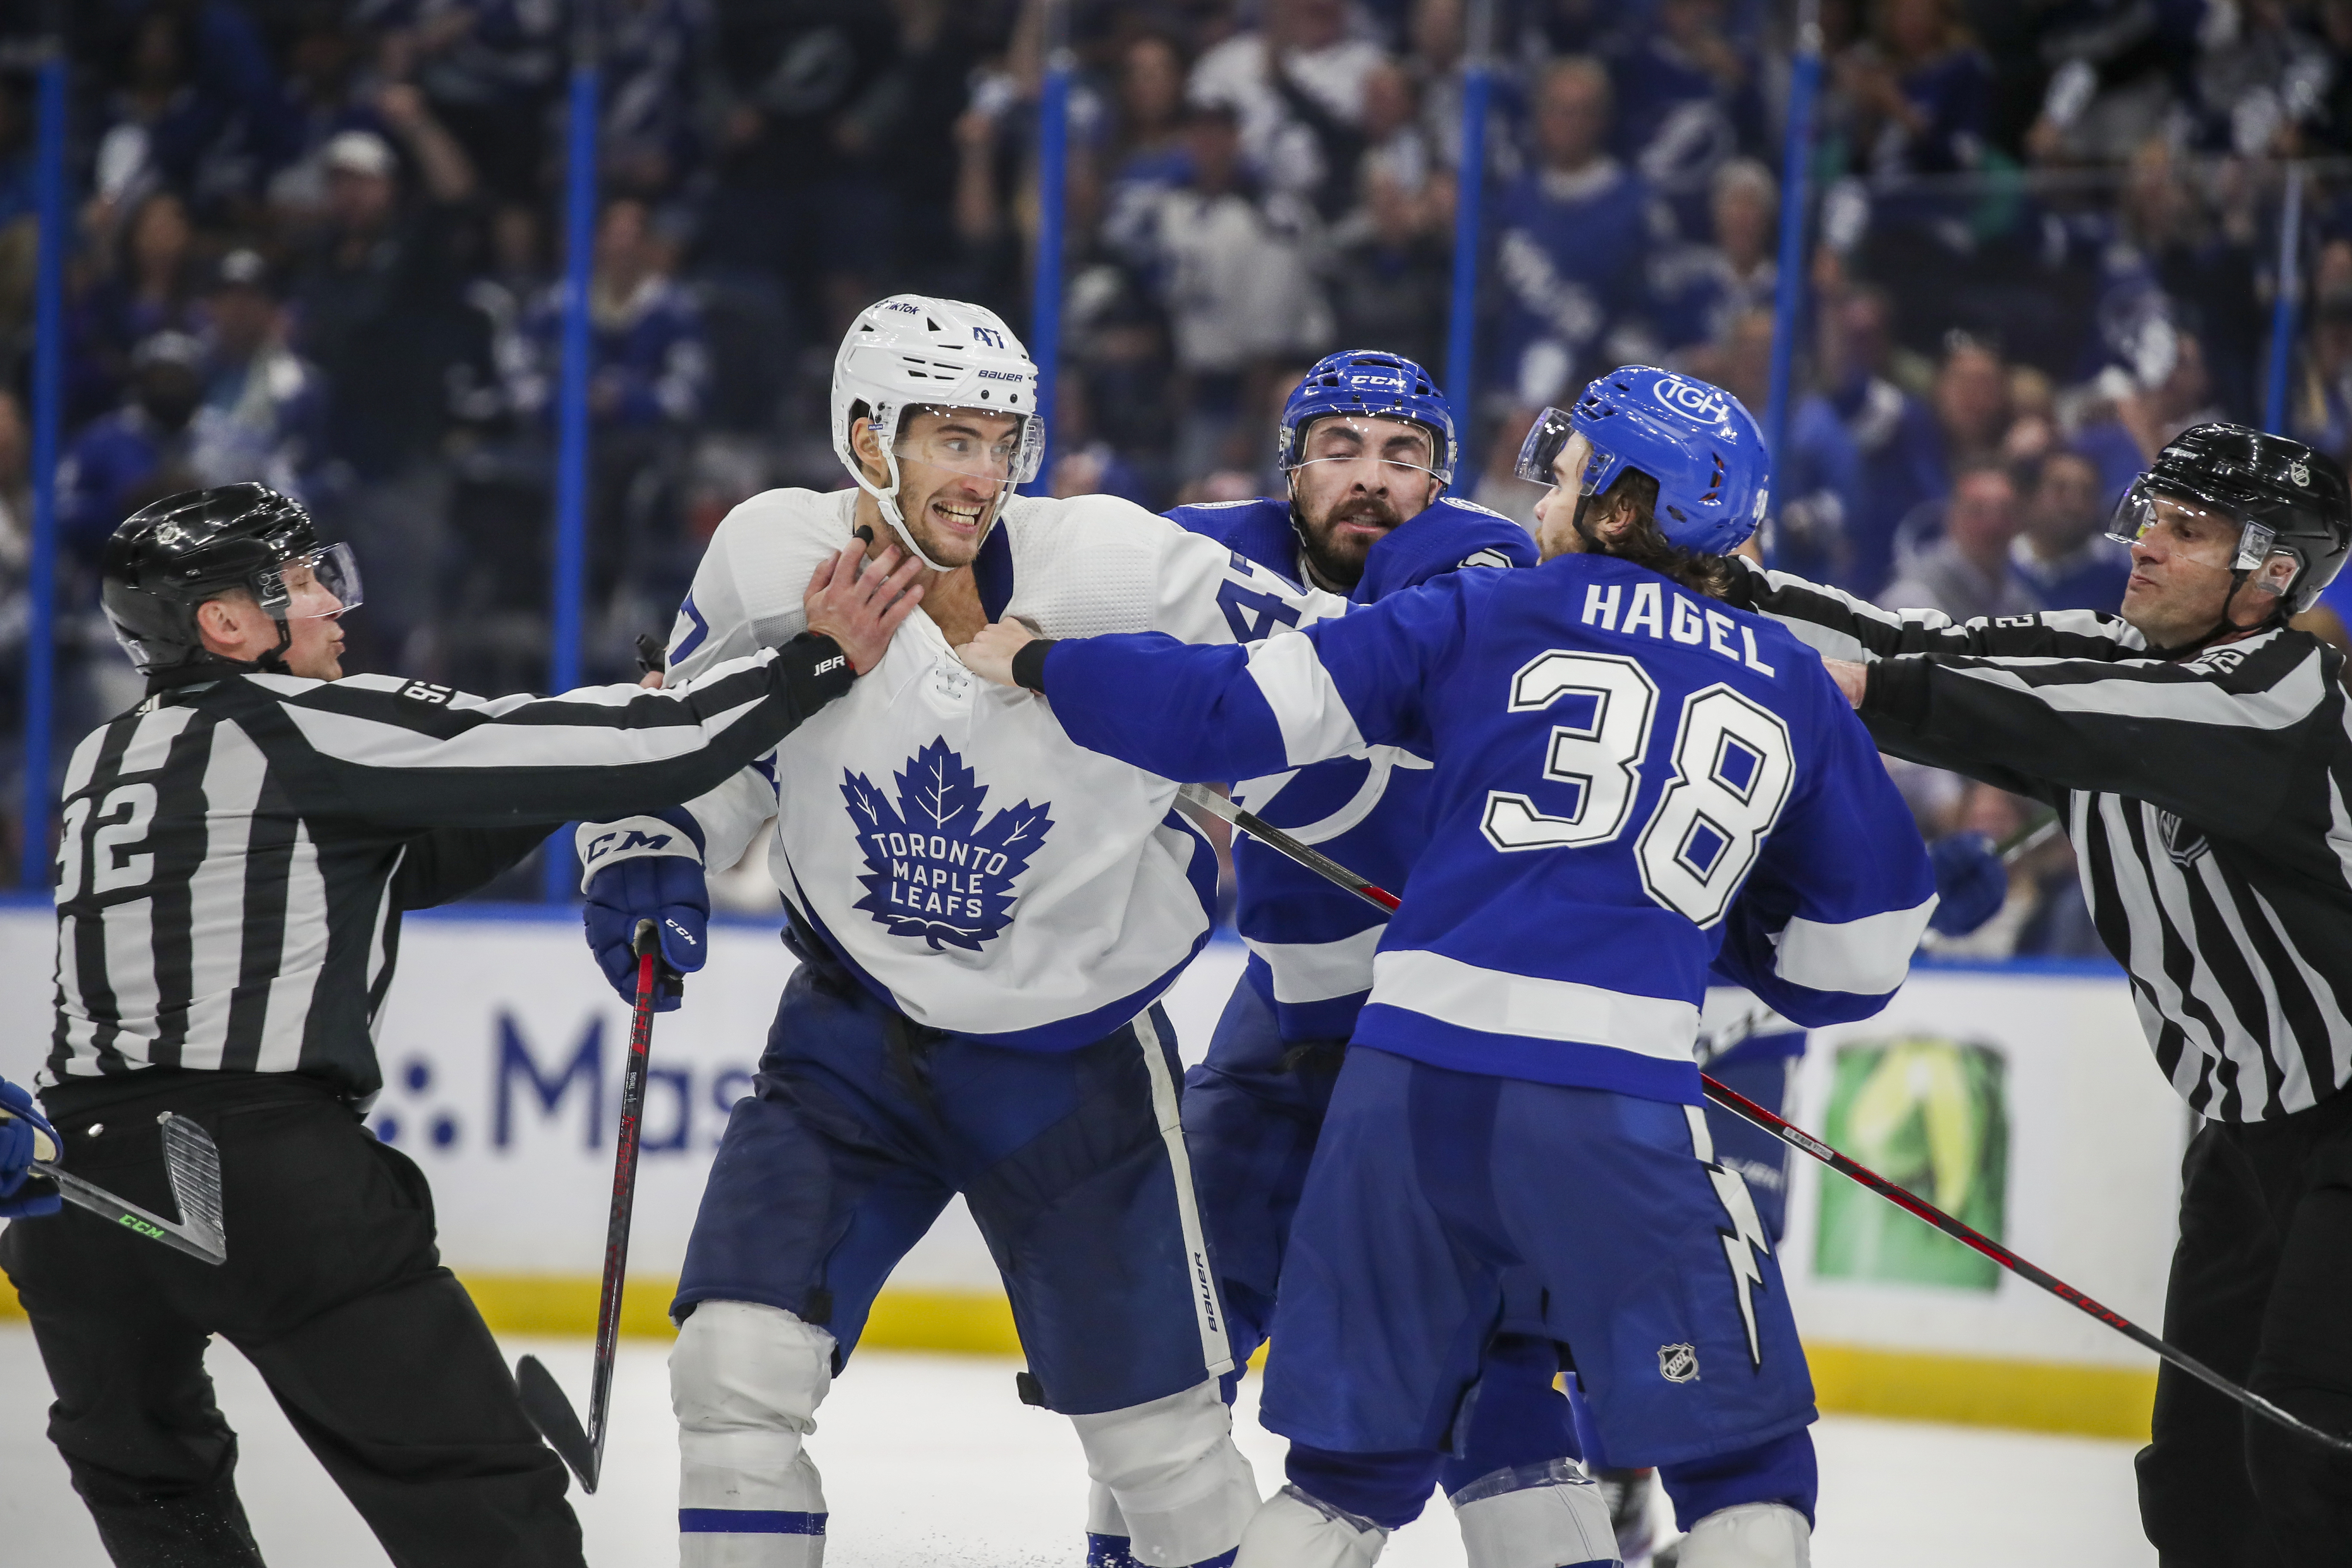 Brandon Hagel leads Lightning in rout of Habs - The Rink Live   Comprehensive coverage of youth, junior, high school and college hockey